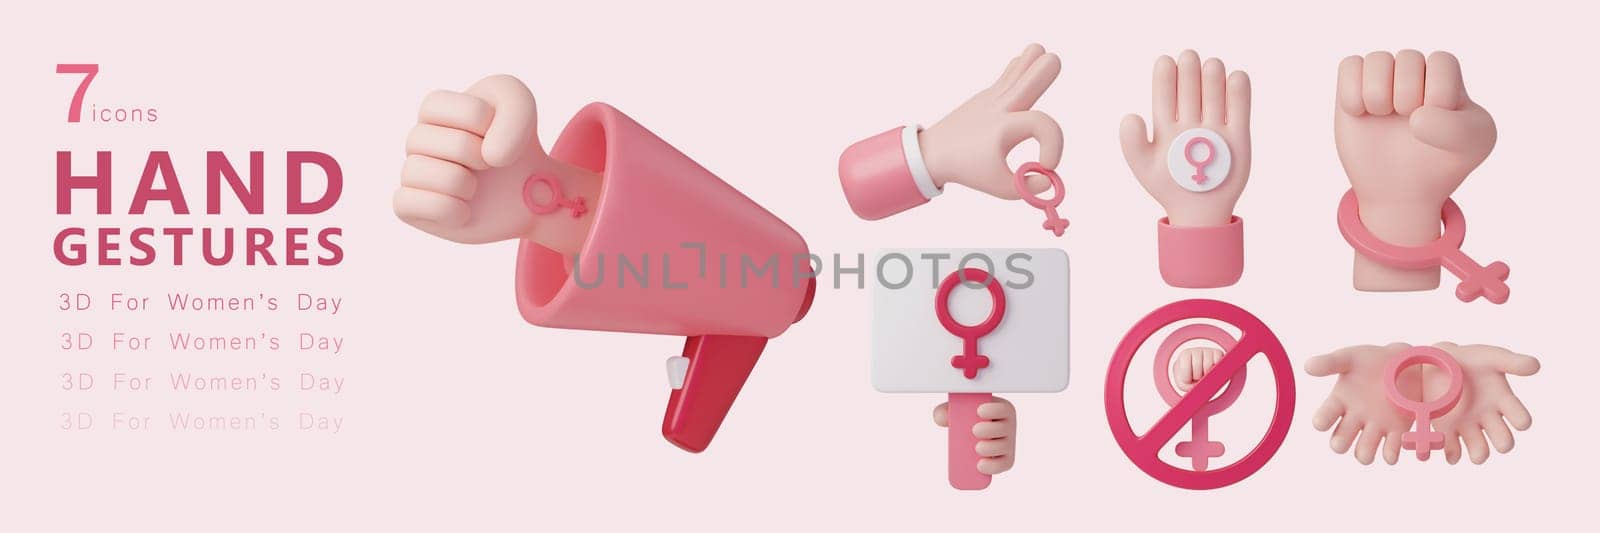 3d Hand gestures icon set , For equality woman's day ,march 8. Raise awareness, prevention, detection, treatment. Icon design 3d illustration.